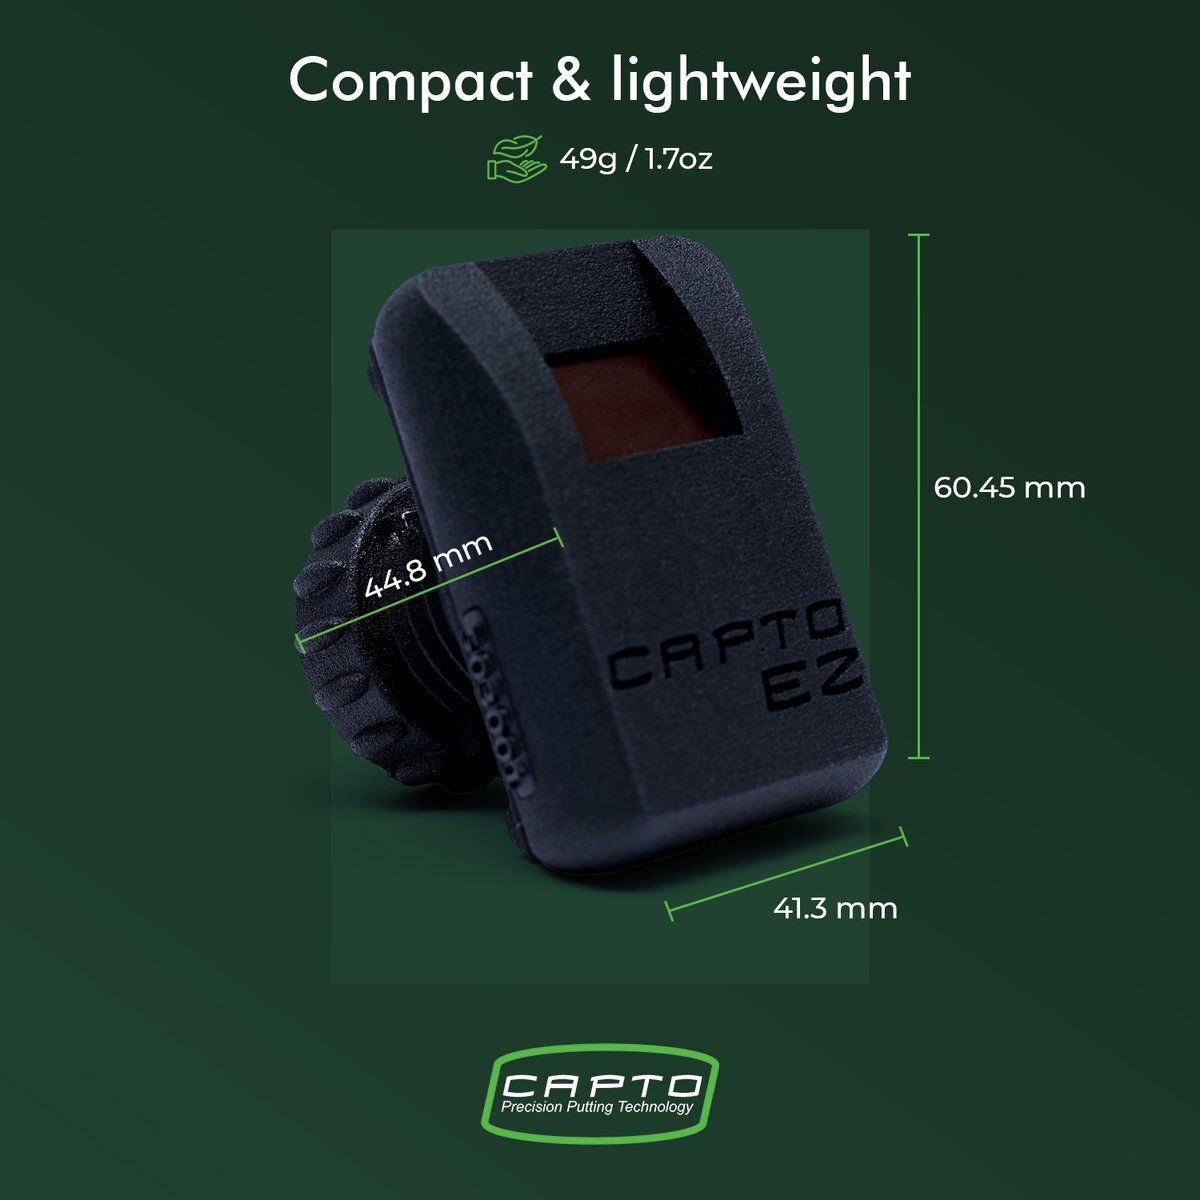 Solid & Light

Capto EZ has been shrink wrapped to be small, lighter and even more portable than any device before.

Enjoy Capto!

Get better and better with Capto EZ!

#captogolf #captoputting #putting #puttinginwork #puttingdata